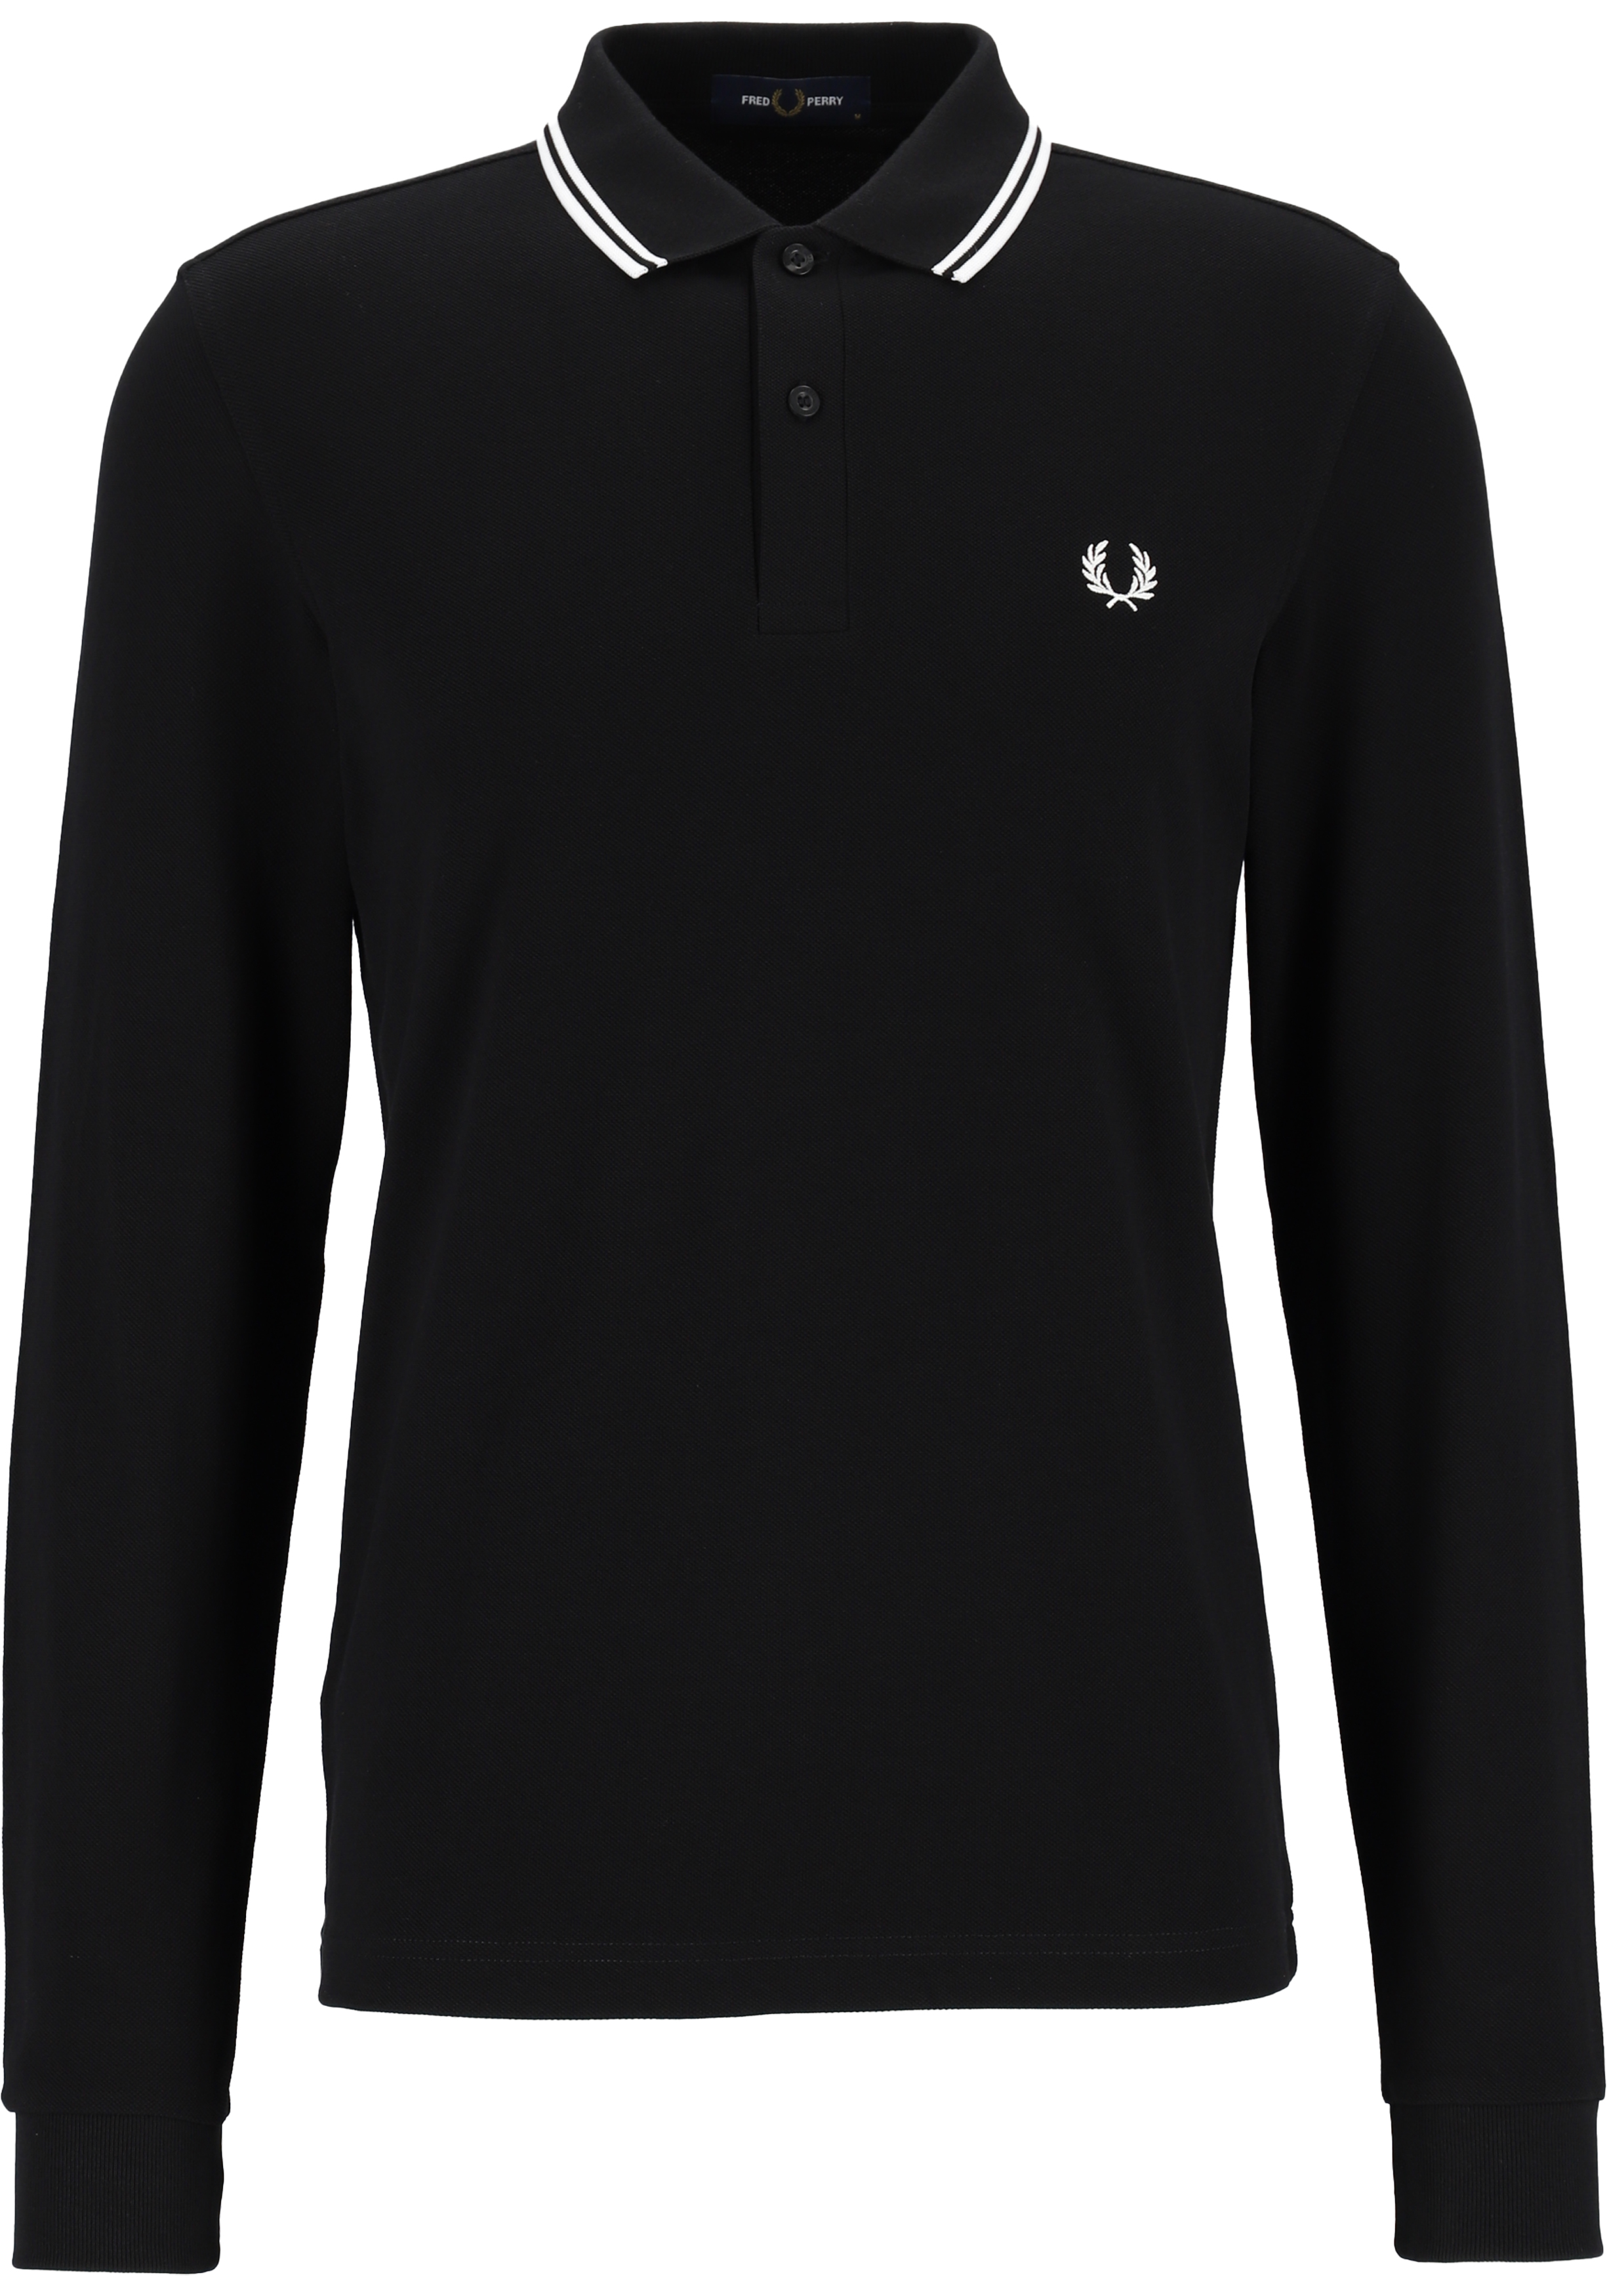 Perth Blackborough Bewolkt fout Fred Perry M3636 long sleeved twin tipped shirt, heren polo lange... - 20%  Paaskorting op (bijna) alles